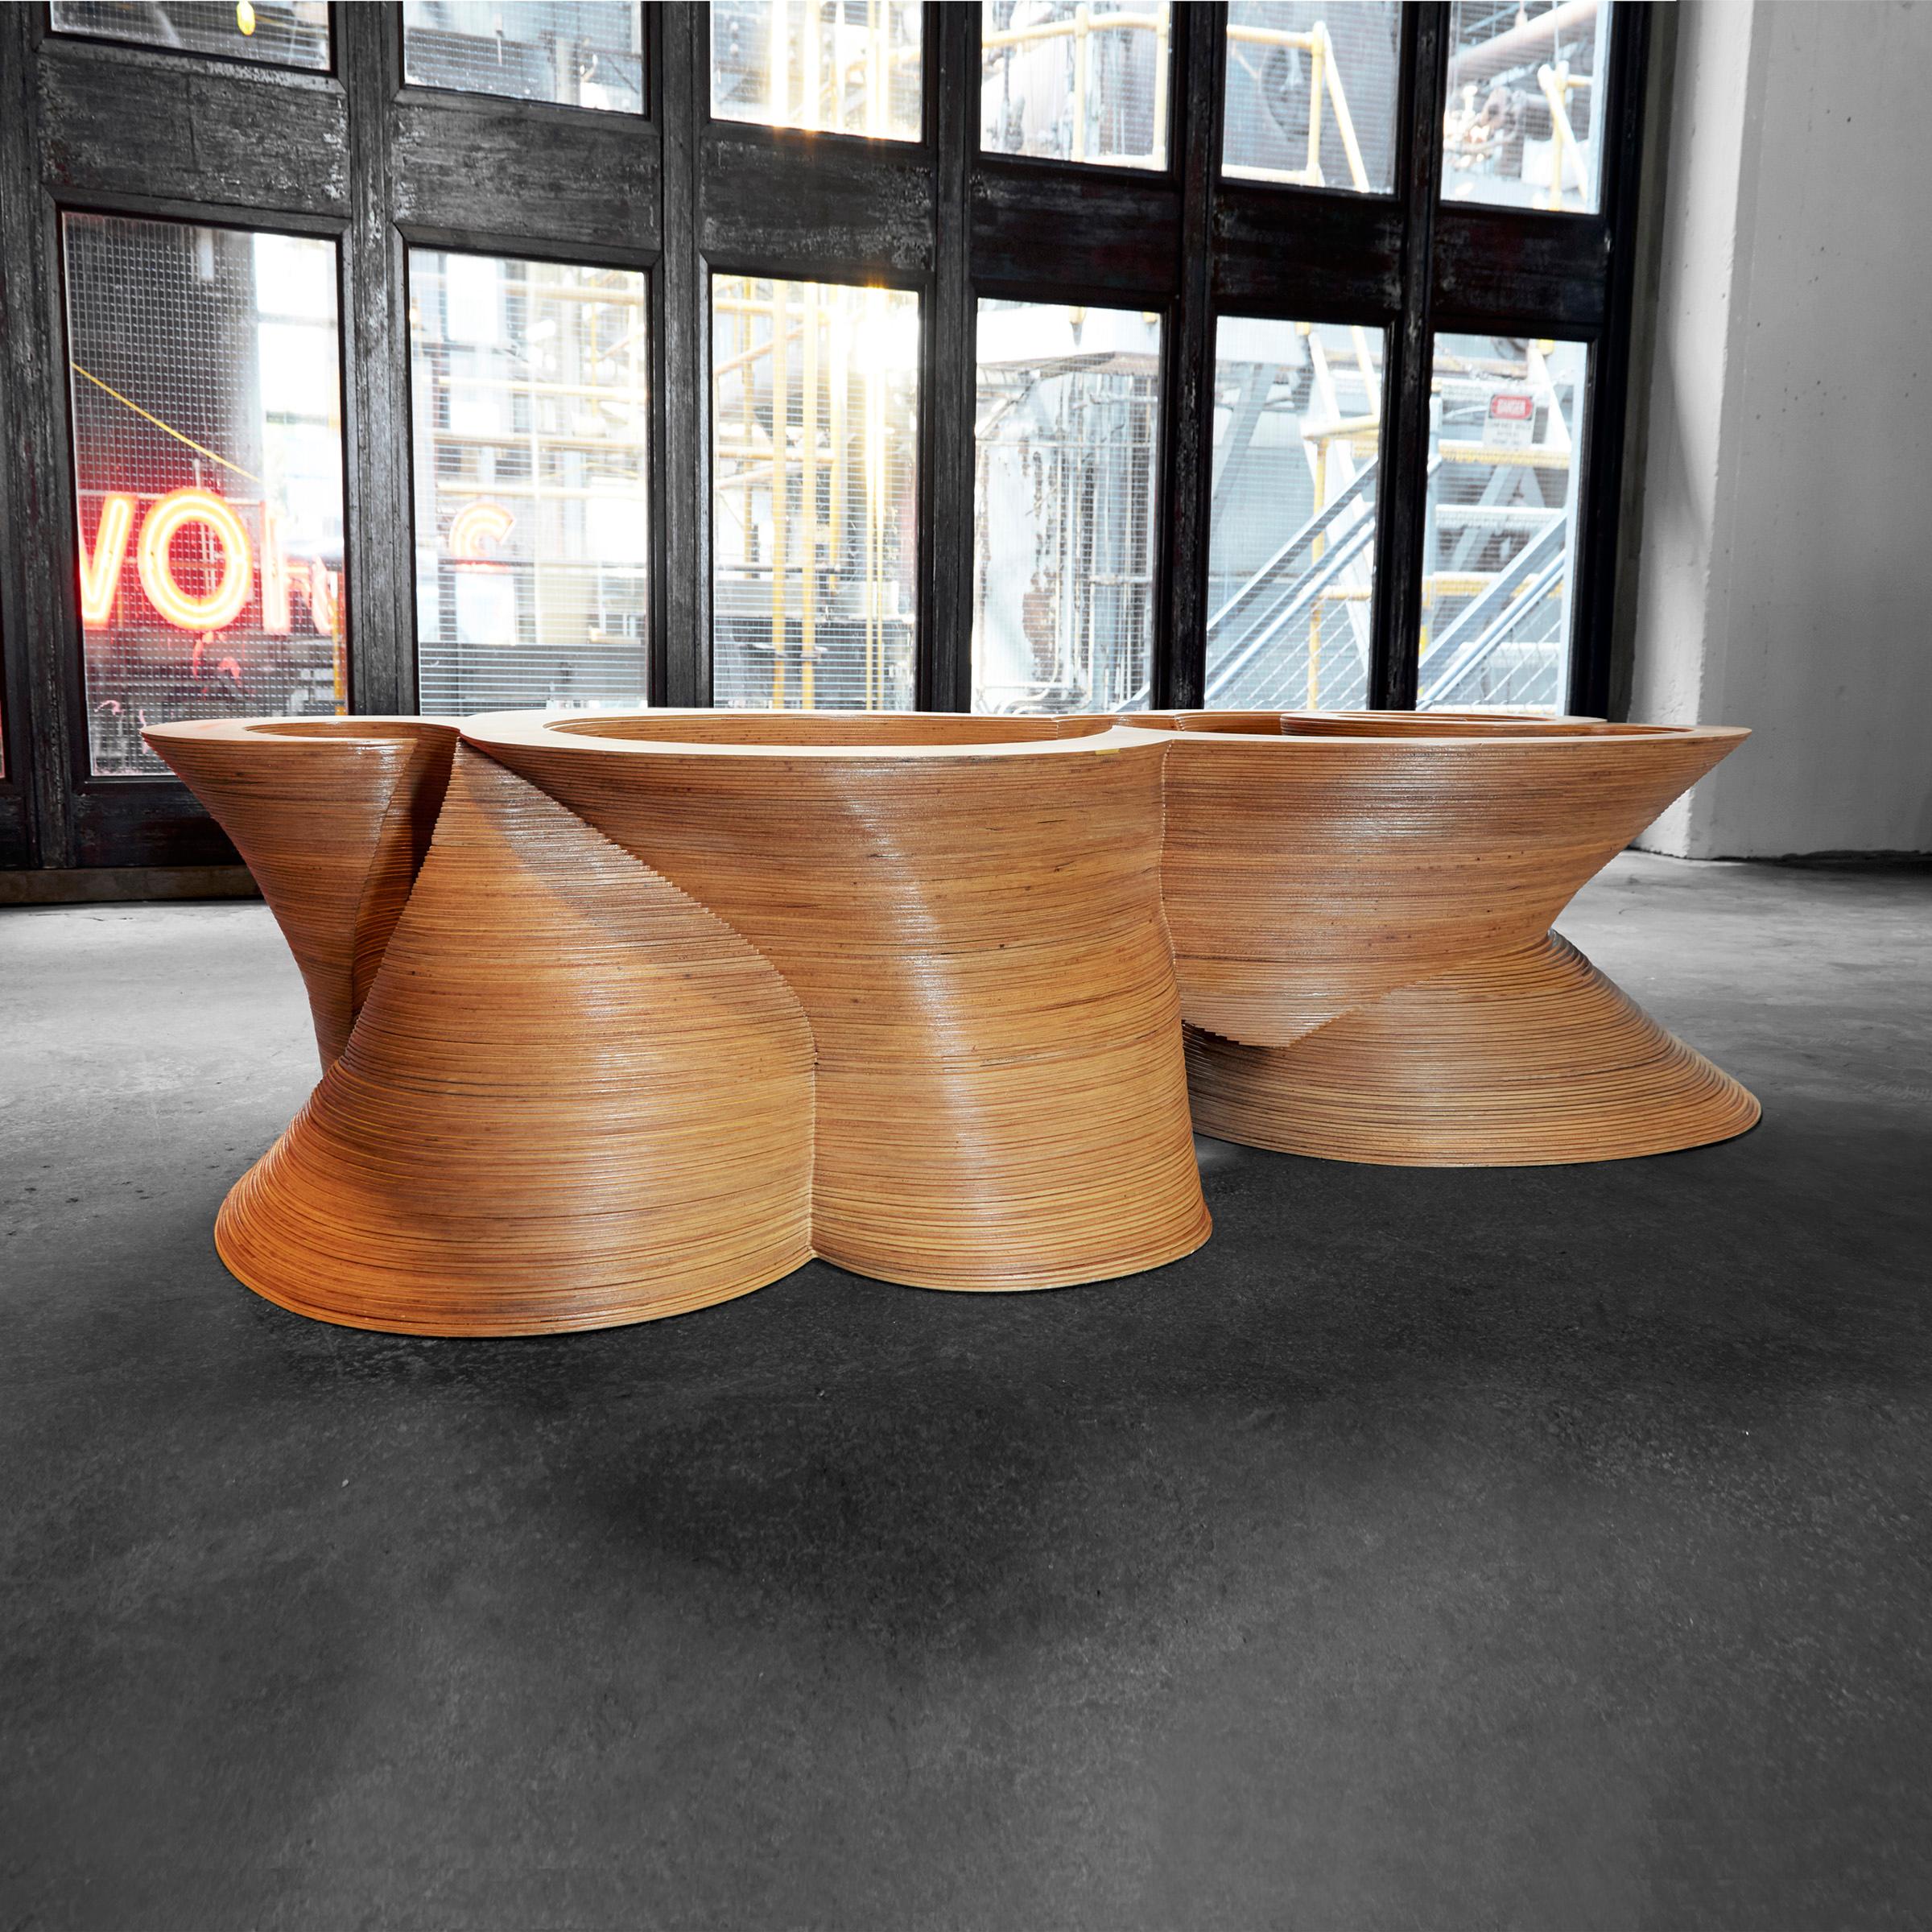 Luxury Organic Modern Coffee Table, Furniture Sculpture, High End Wood Art In New Condition For Sale In Bridgeport, PA